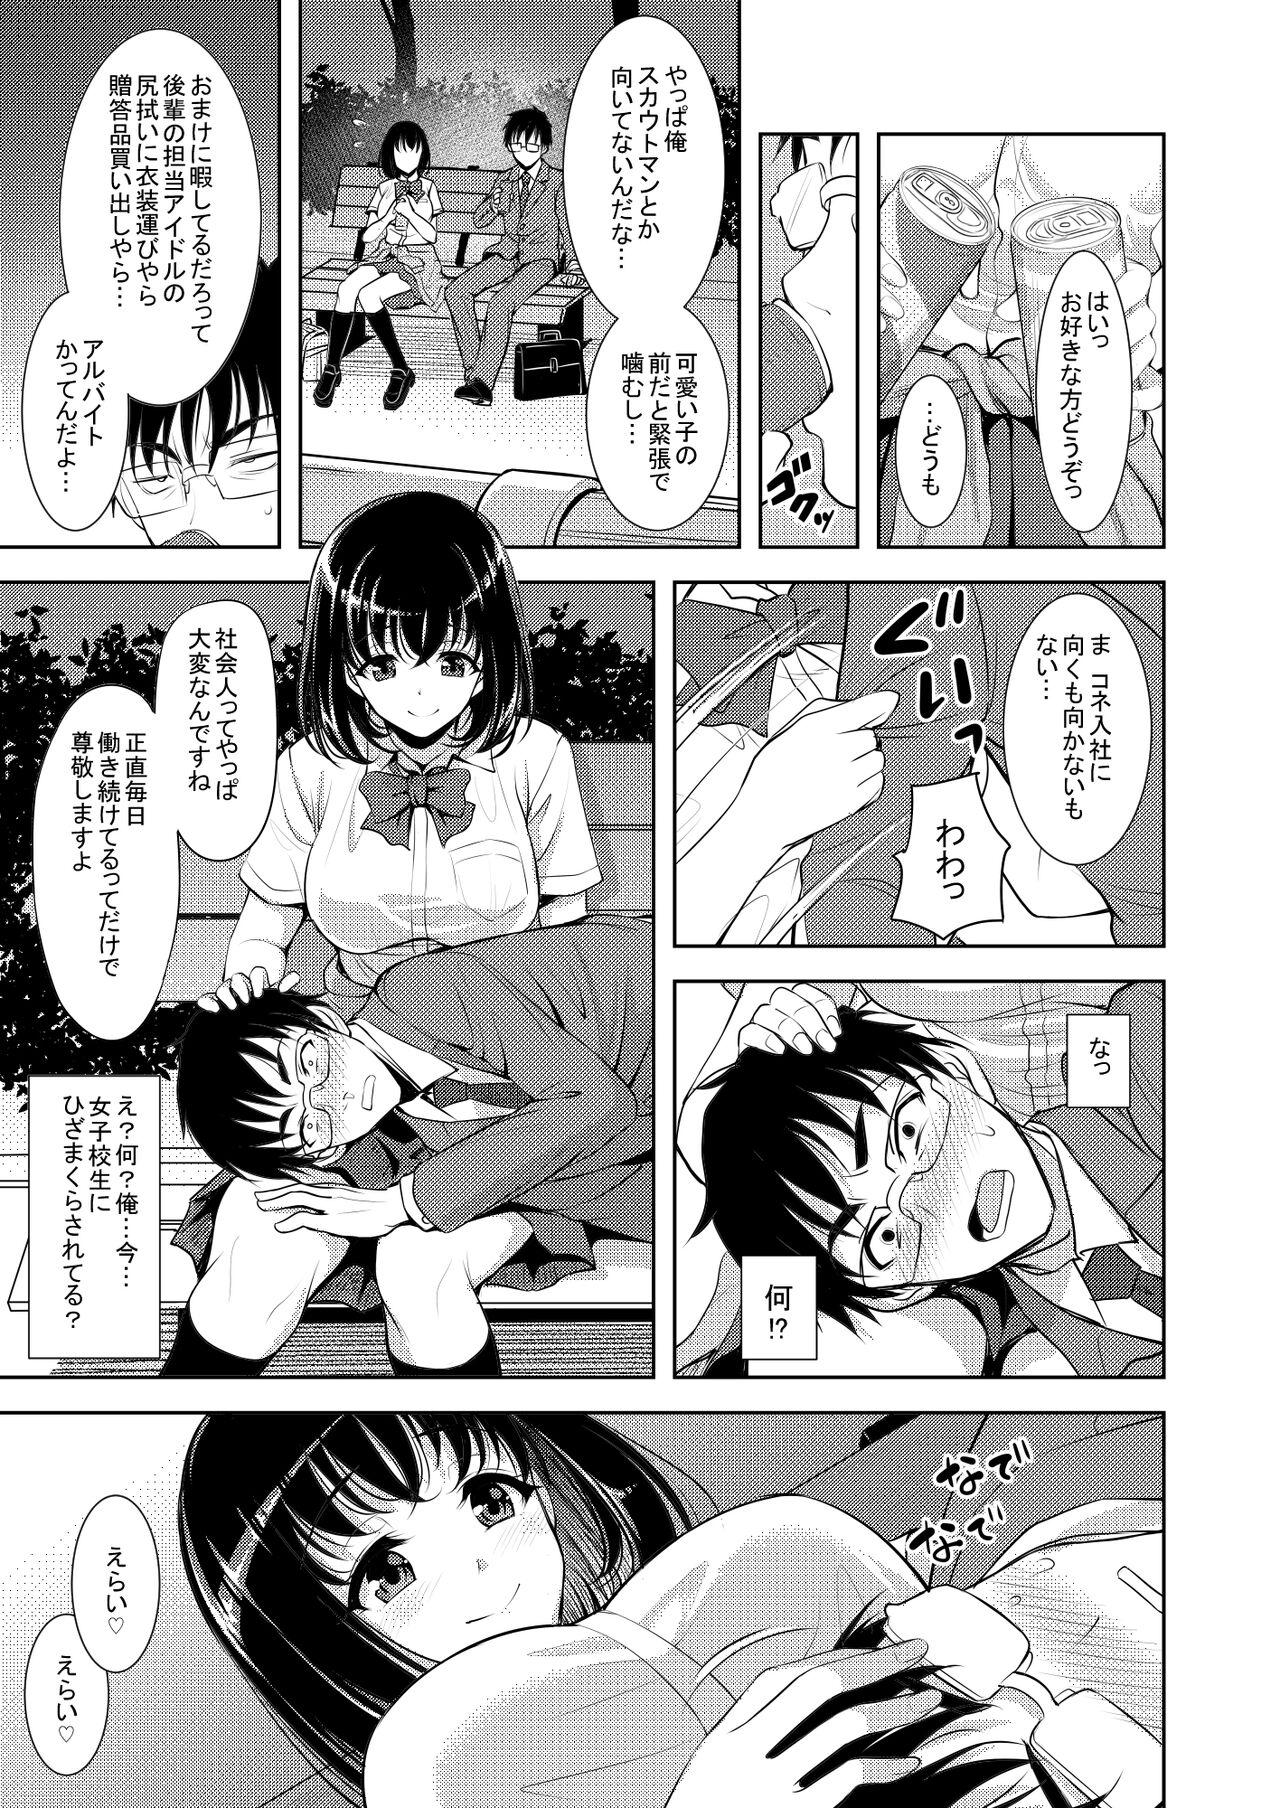 Shaven ゆるふわびっち Con - Page 4